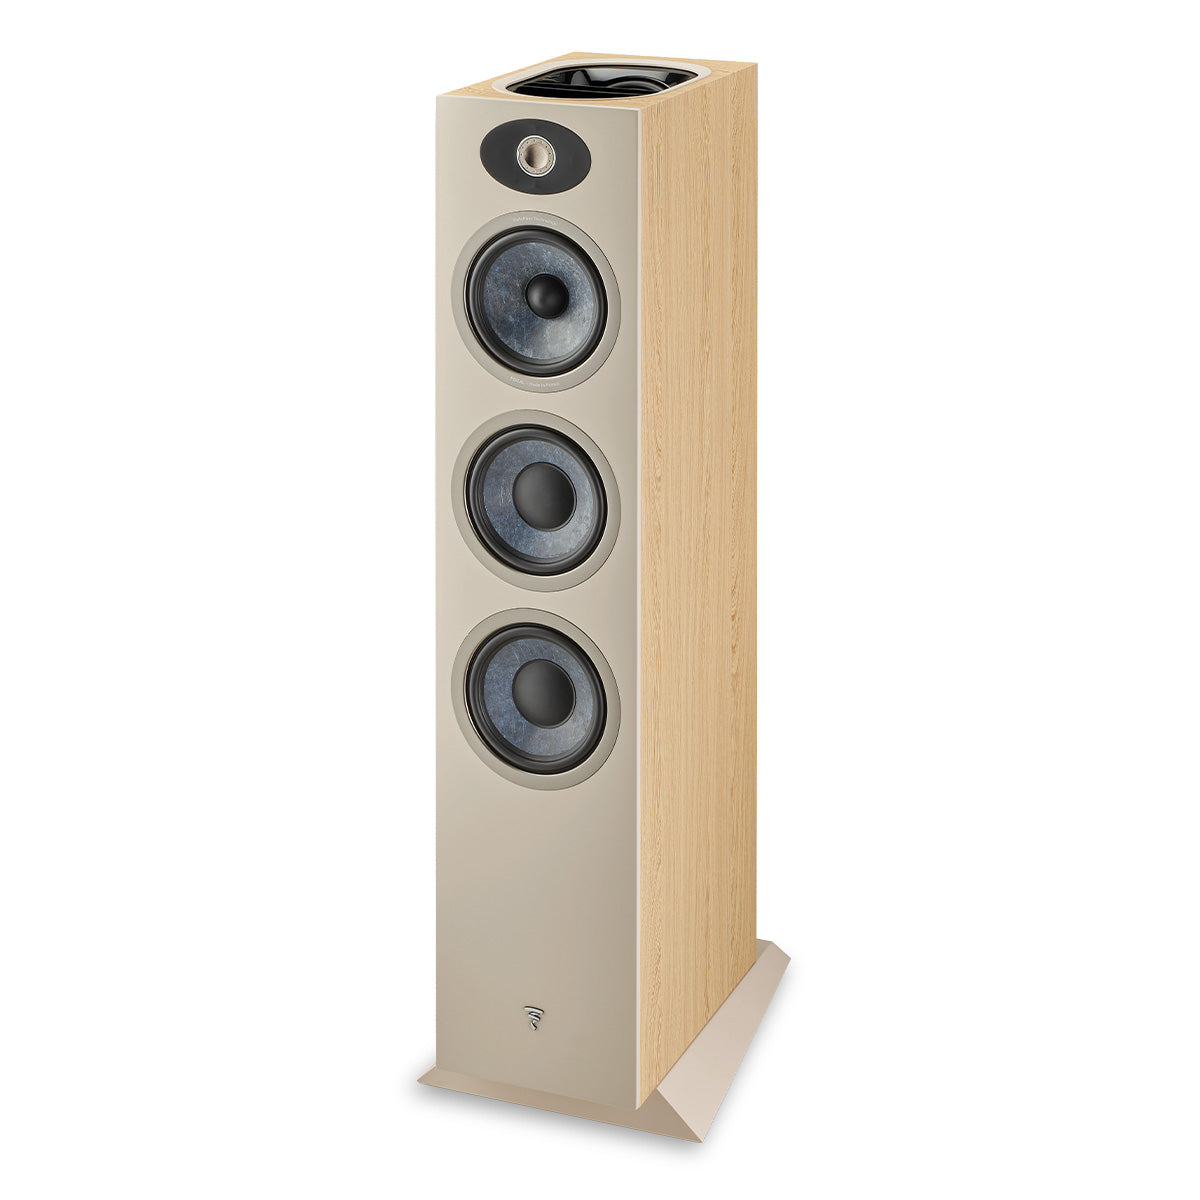 Focal Theva No.3-D 3-Way Bass-Reflex Floorstanding Loudspeaker with 5" Full-Range Up-Firing Driver for Dolby Atmos Effects - Each (Light Wood)